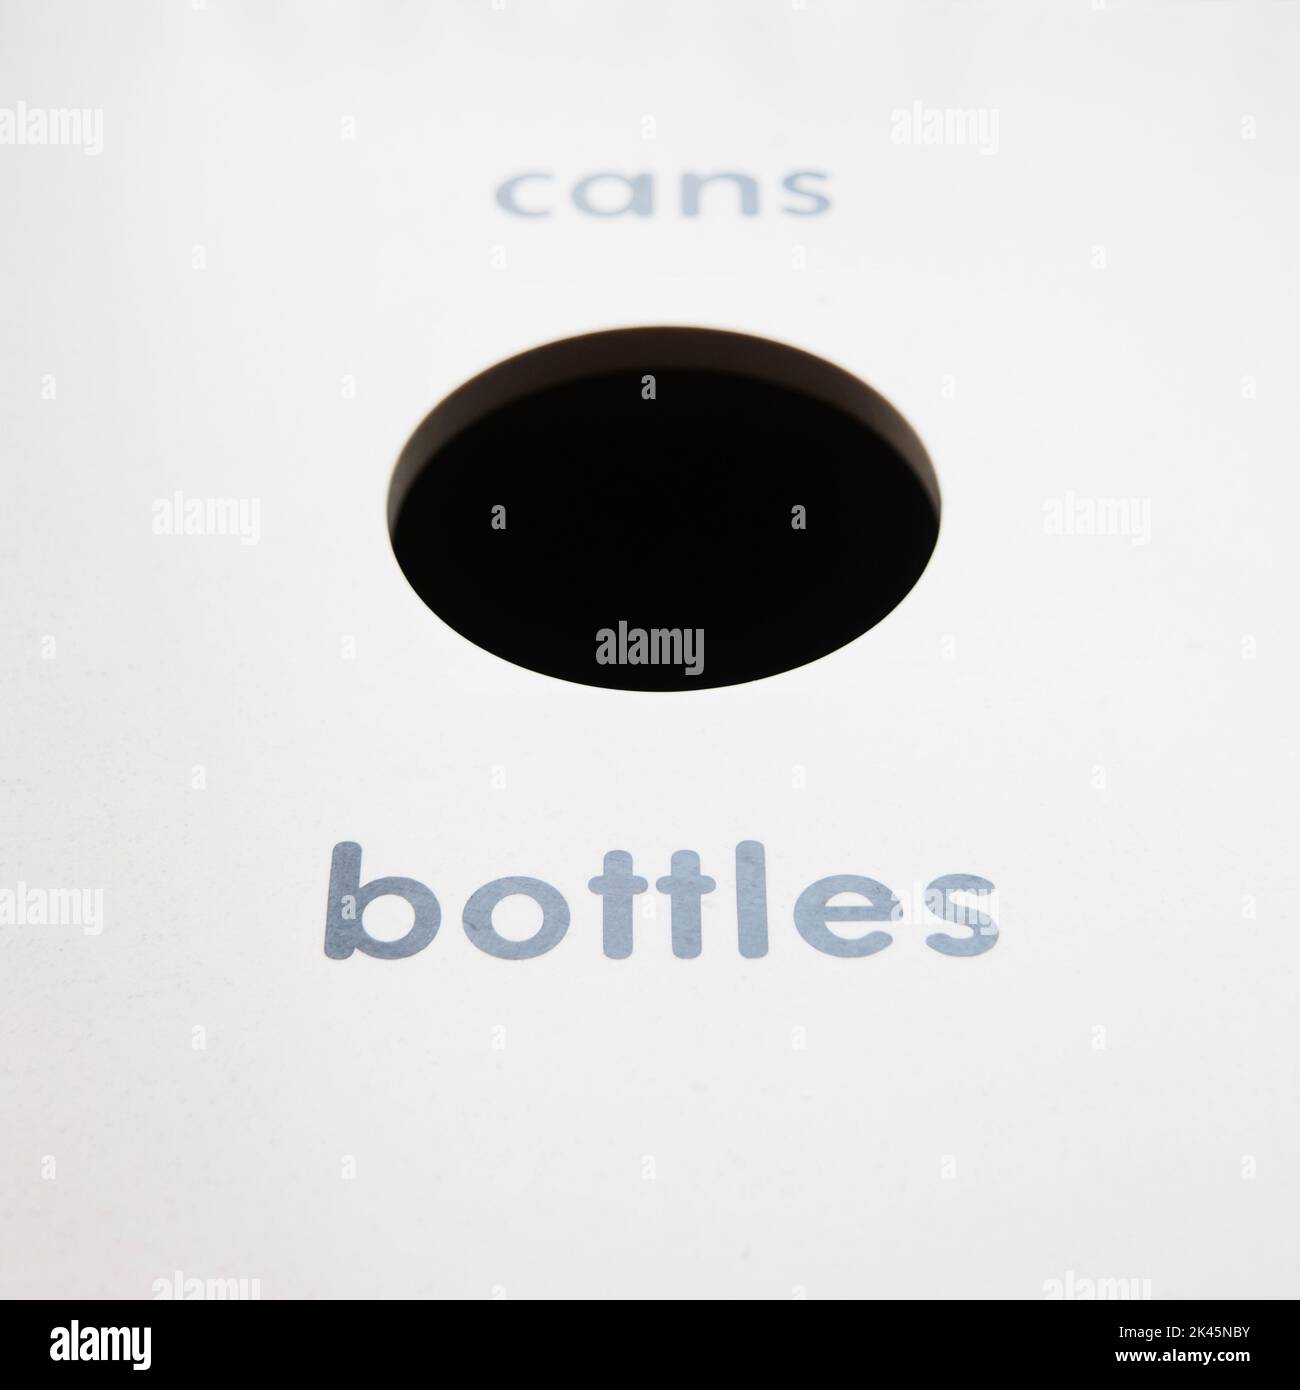 A recycling bin for bottles and cans. Stock Photo